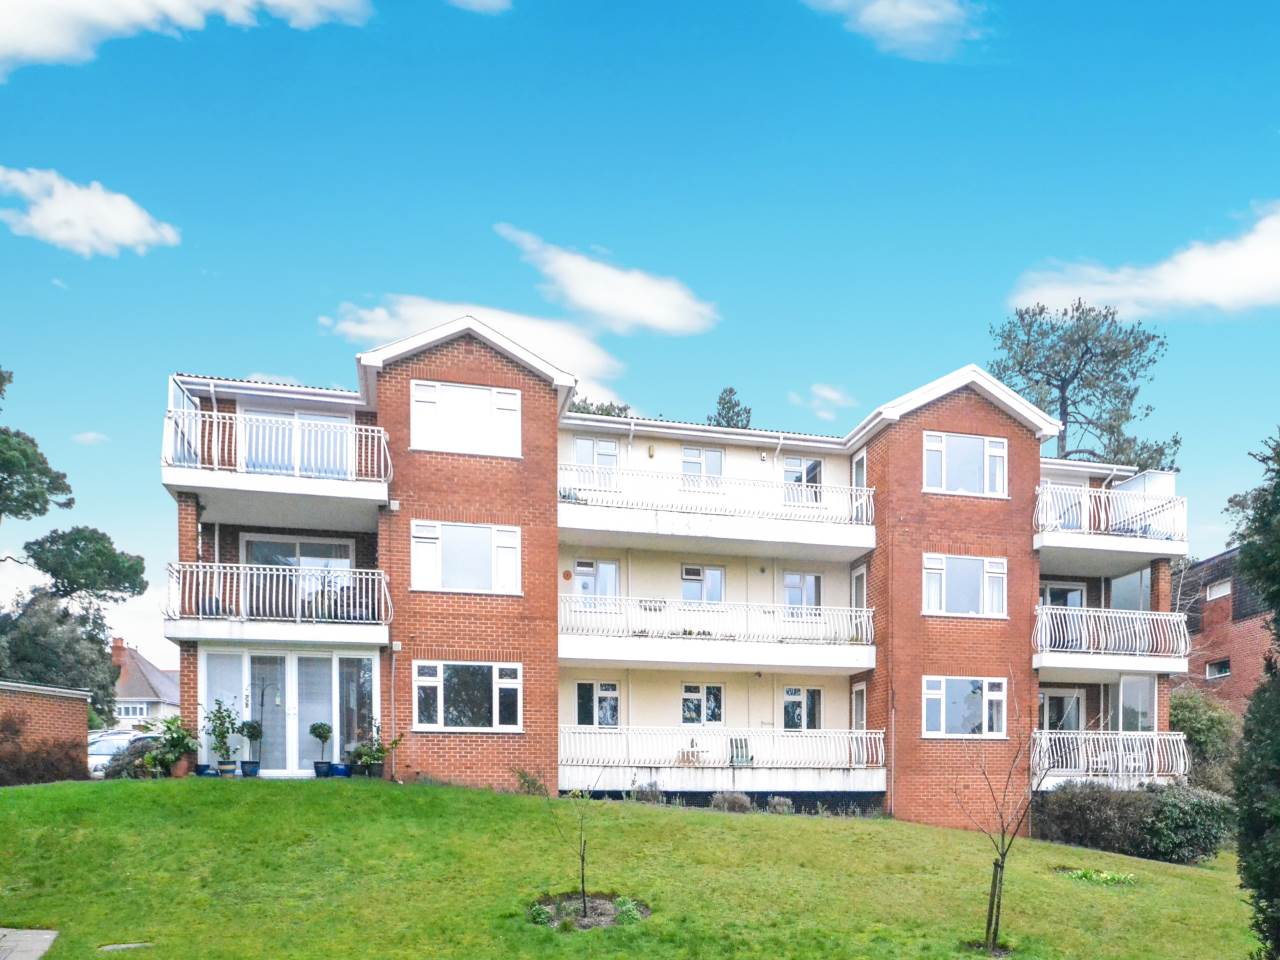 * NO CHAIN * THREE DOUBLE BEDROOMS * FIRST FLOOR APARTMENT * 26' LOUNGE/DINER * SOUTH FACING BALCONY * EN SUITE TO MASTER * GARAGE & PARKING * SHARE OF FREEHOLD * CLOSE TO PARKSTONE GOLF CLUB *